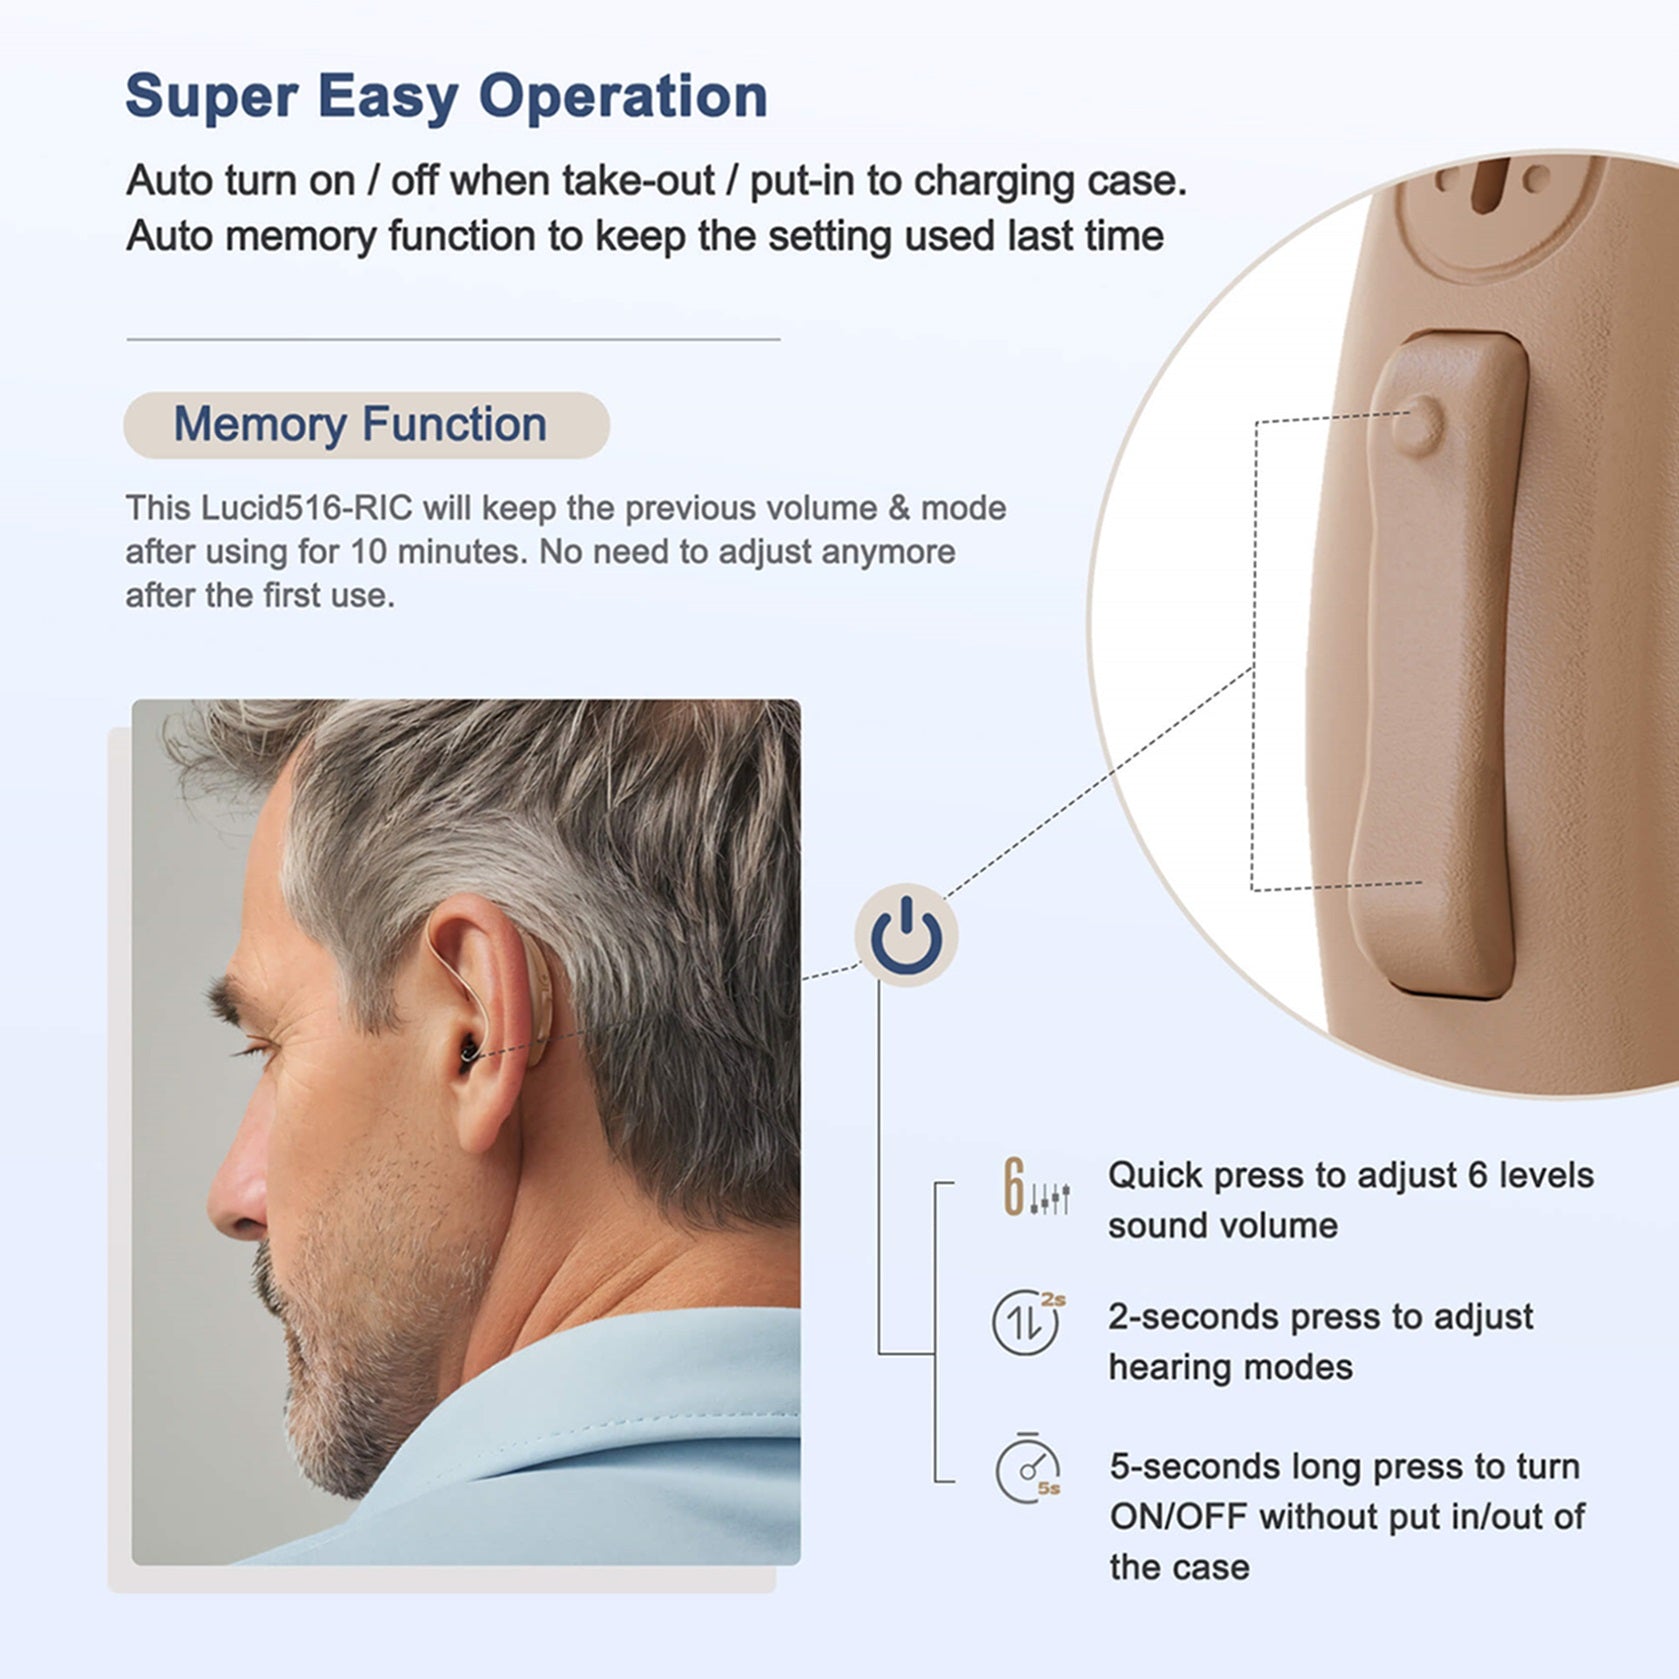 Kinds of Hearing Aids - Lucid516 RIC-f2: Invisible, Small Hearing Aids for Elderly, Hearing Aid Types and Costs